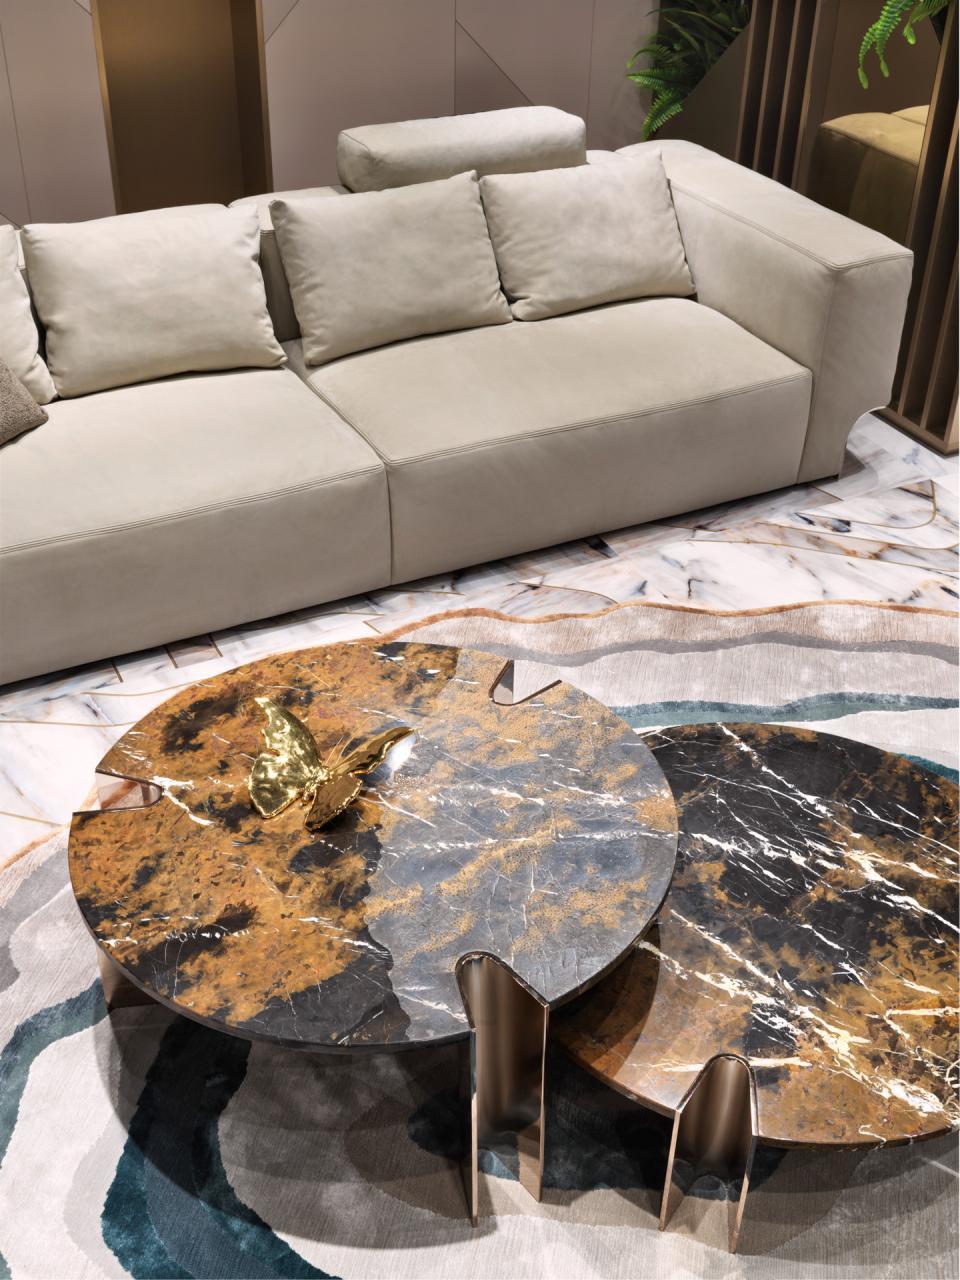 Luxury Italian Furniture Living Room Center Table Marble Top Stainless Steel Oval Shape Villa Modern Combination Coffee Table